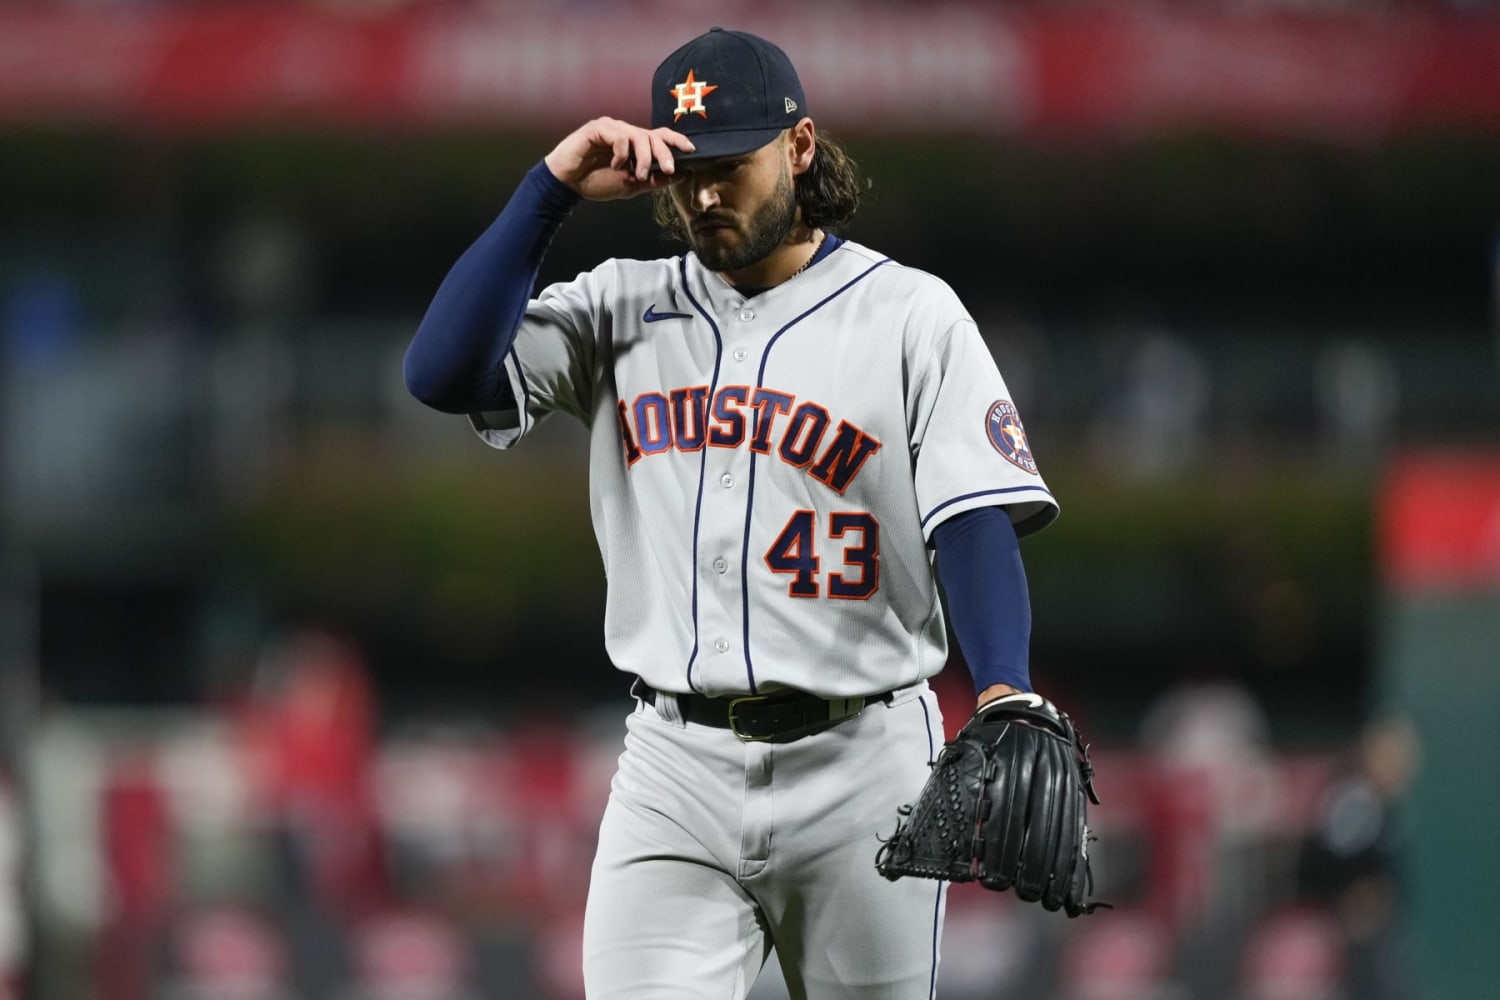 All-Star pitcher Lance McCullers Jr. agrees to $85M extension with